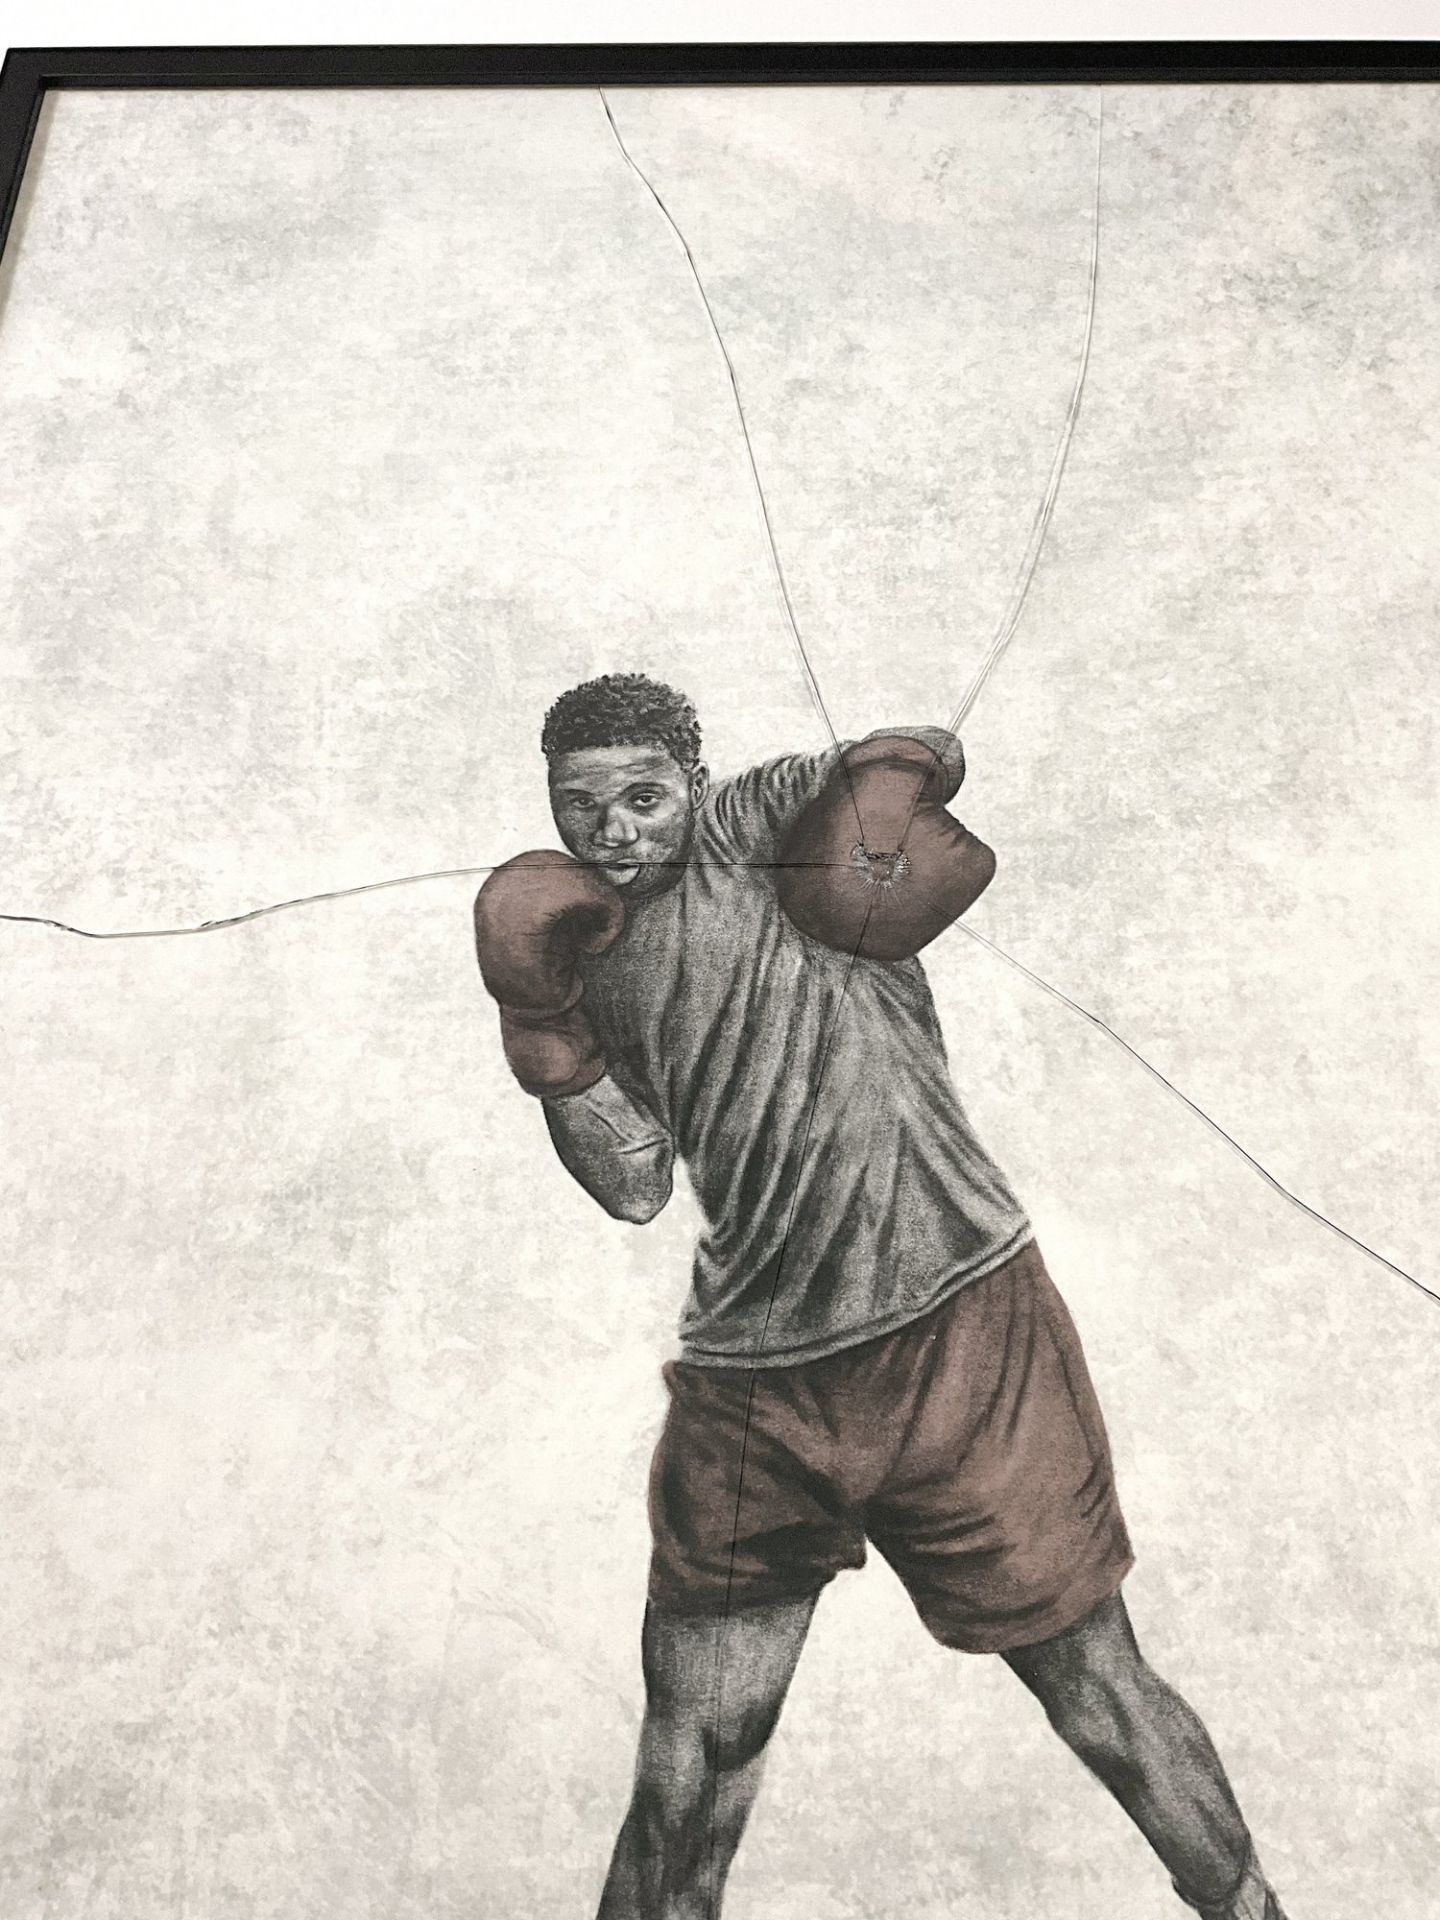 The Boxerâ€™ by Andrew Scott - Brand New, Authentic Art Piece - 1 of Only 192! - Image 2 of 3